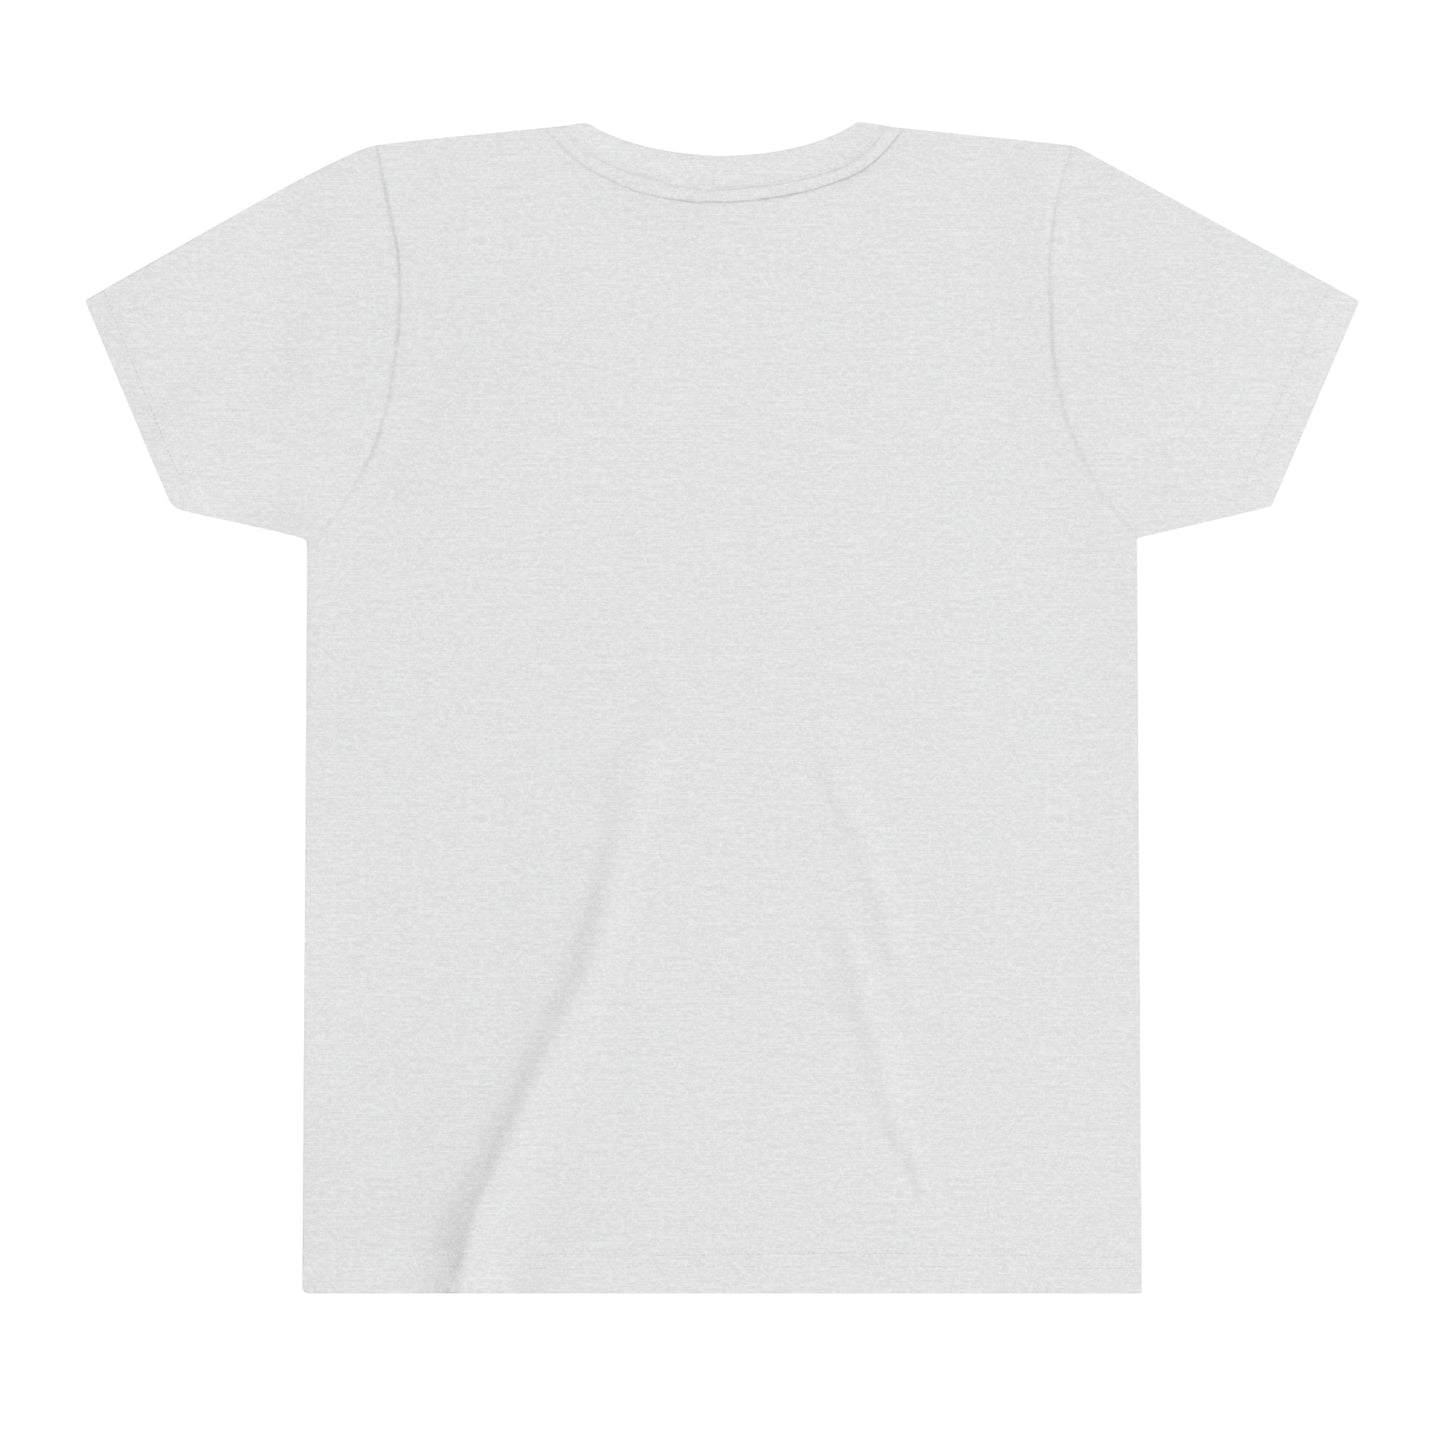 First Grade Youth Short Sleeve Tee